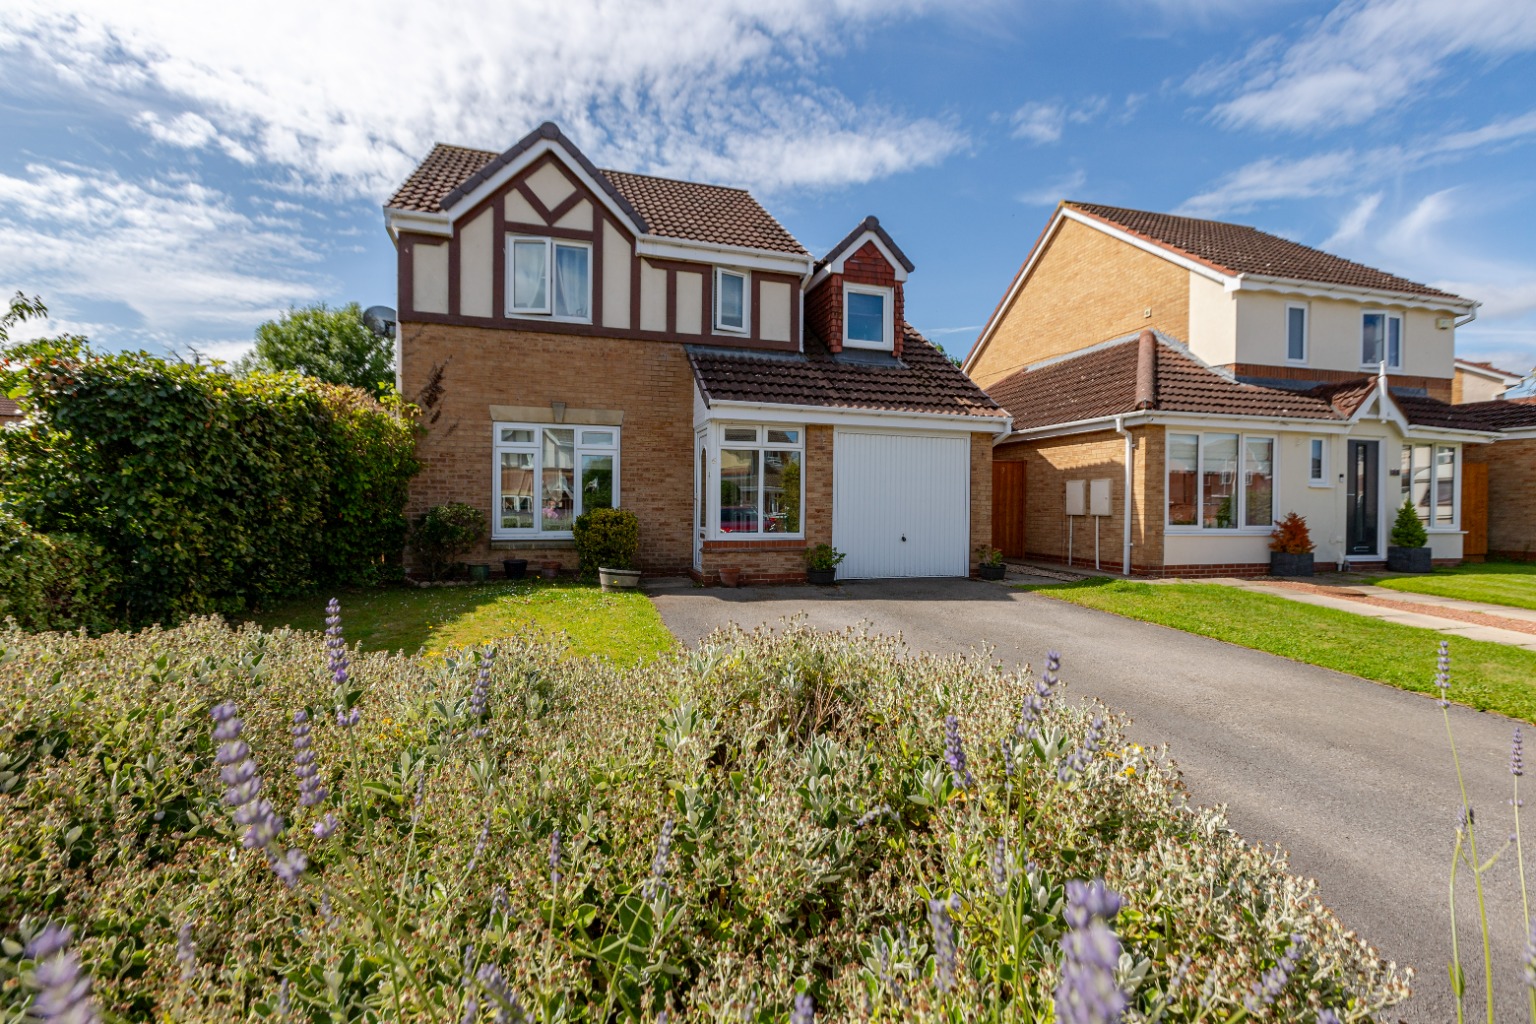 4 bed detached house to rent in Cookson Way, Catterick Garrison - Property Image 1